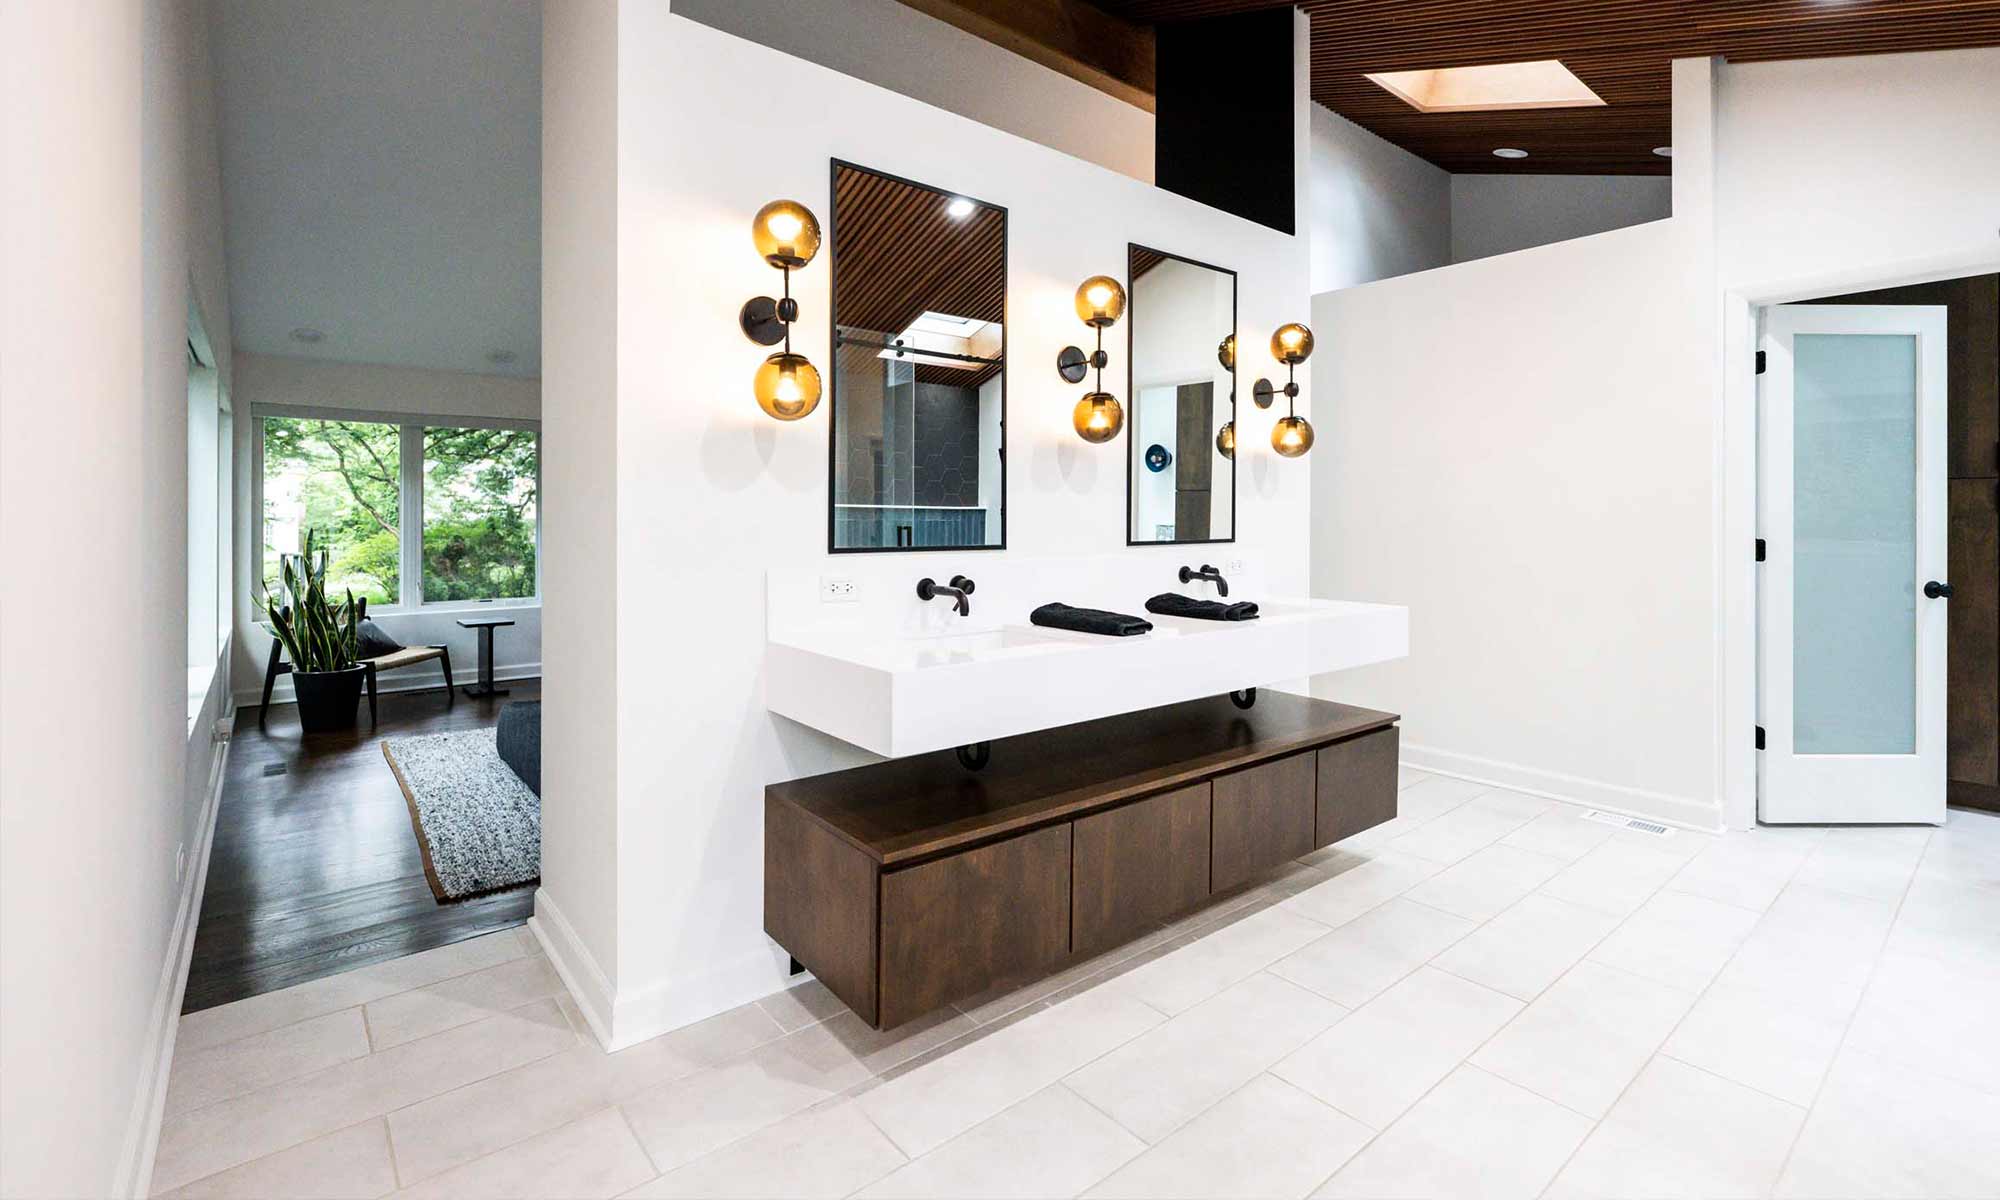 luxury California style modern bathroom remodel by LivCo in Hinsdale Illinois